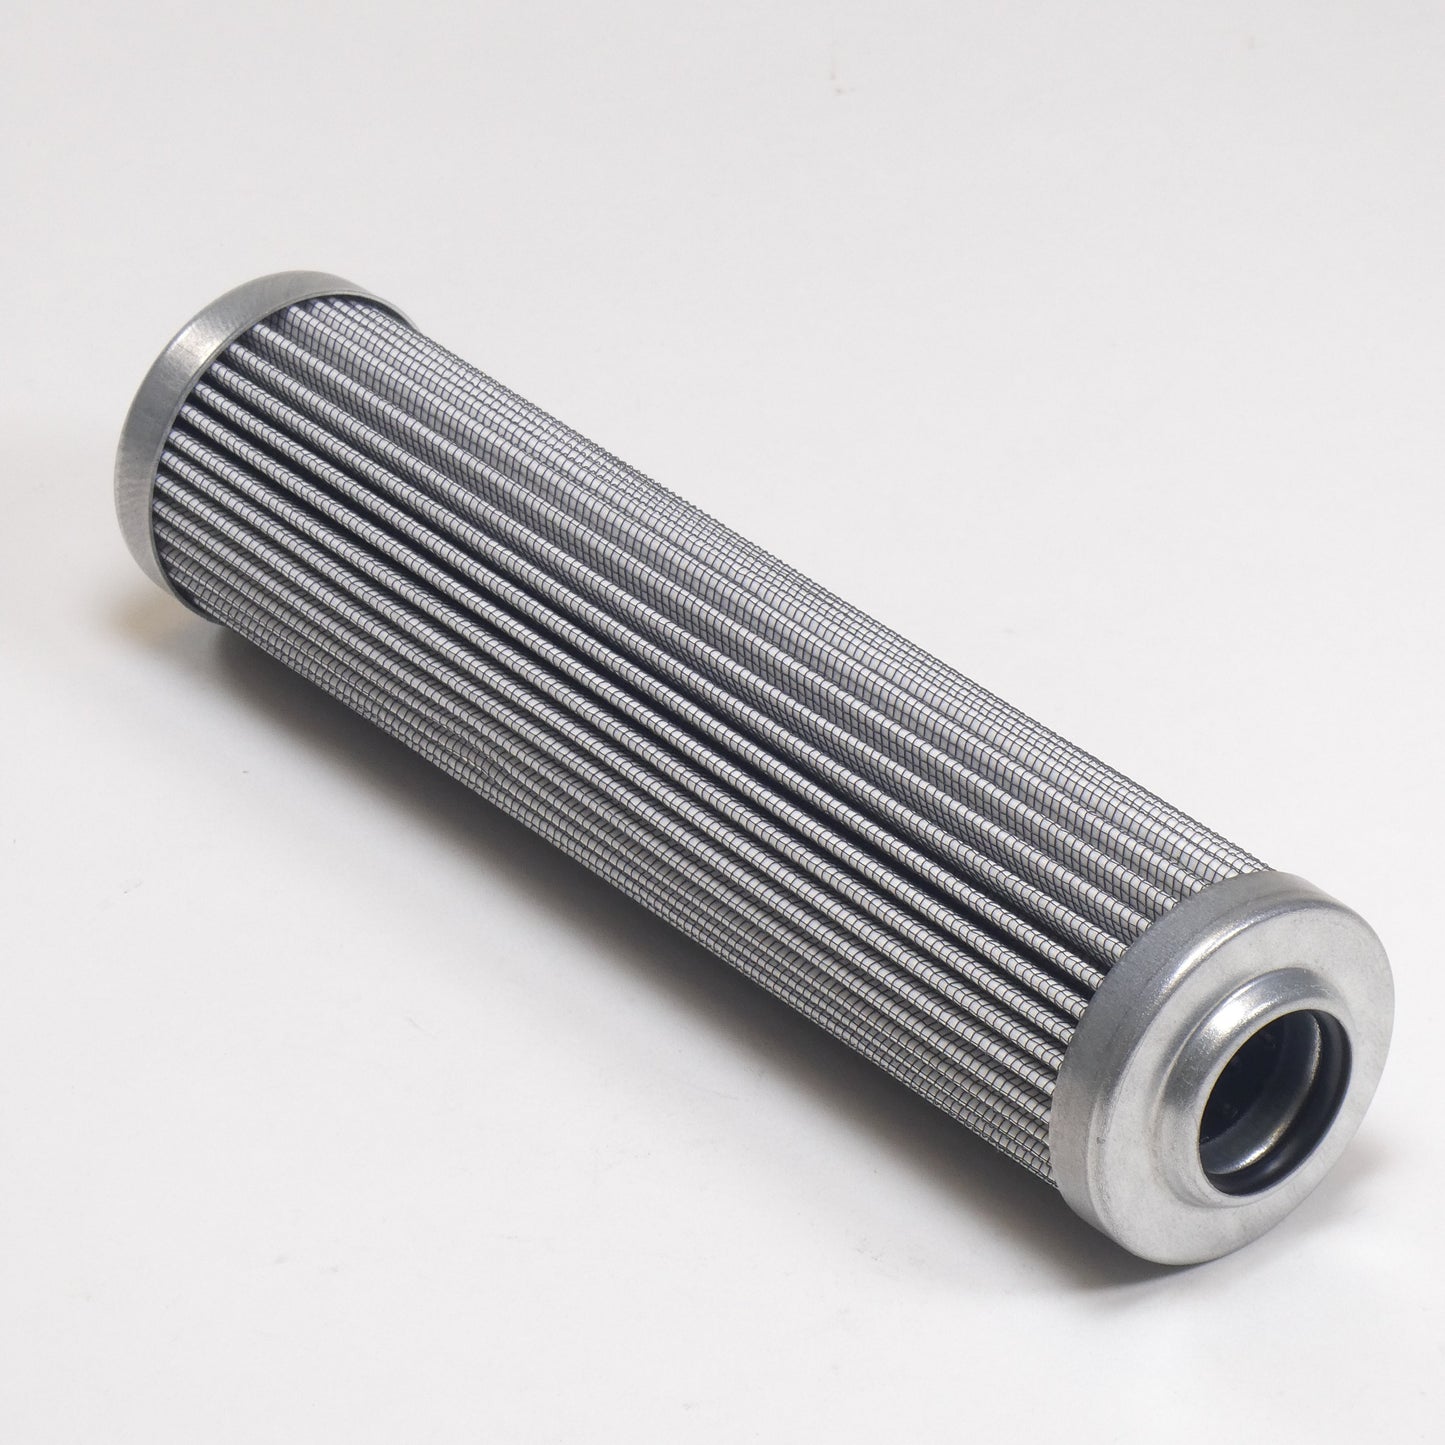 Hydrafil Replacement Filter Element for Baldwin H9111